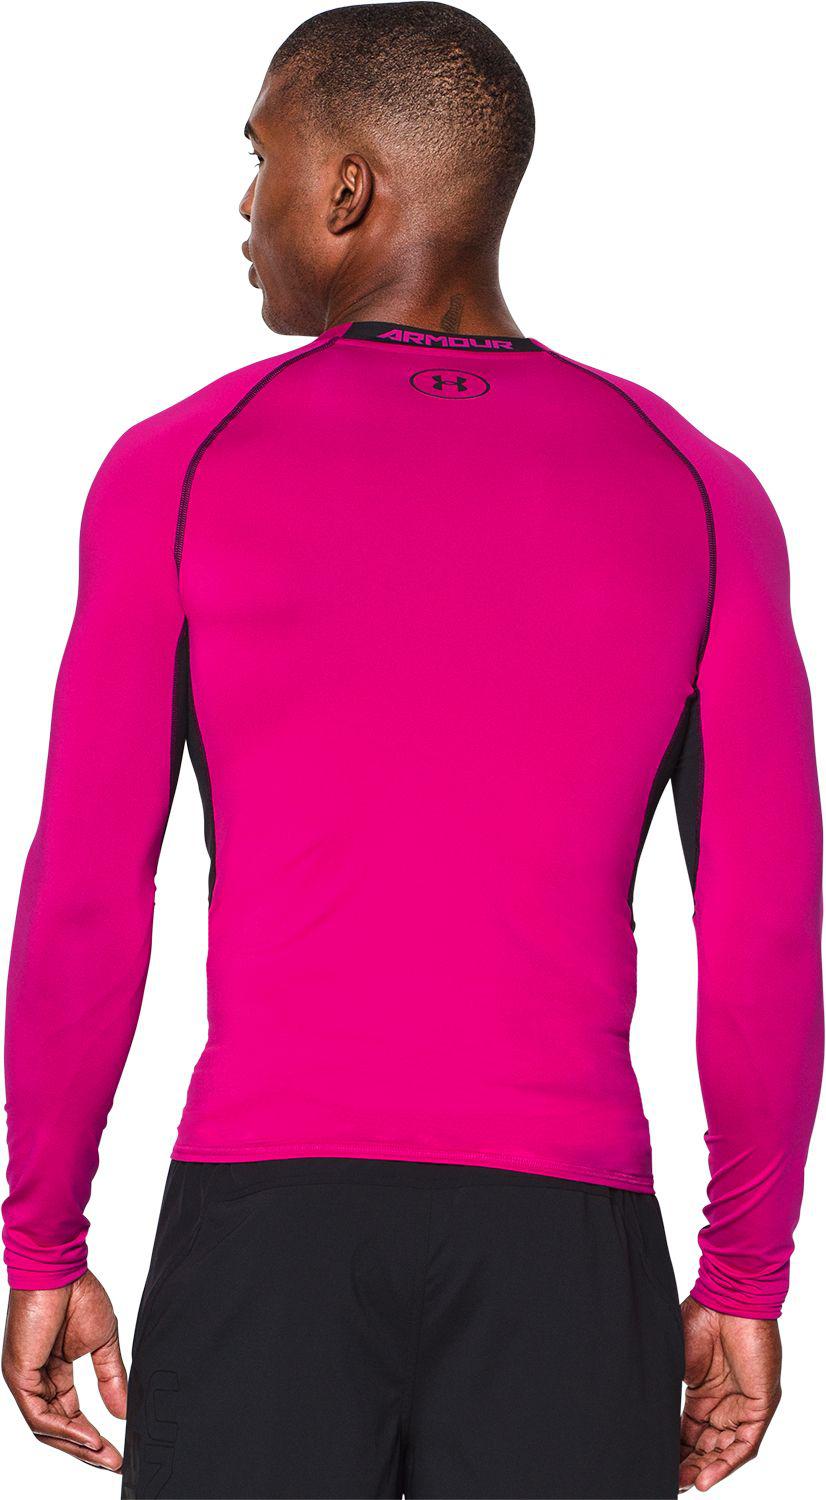 Under Armour Synthetic Power In Pink Heatgear Armour Compression Long ...